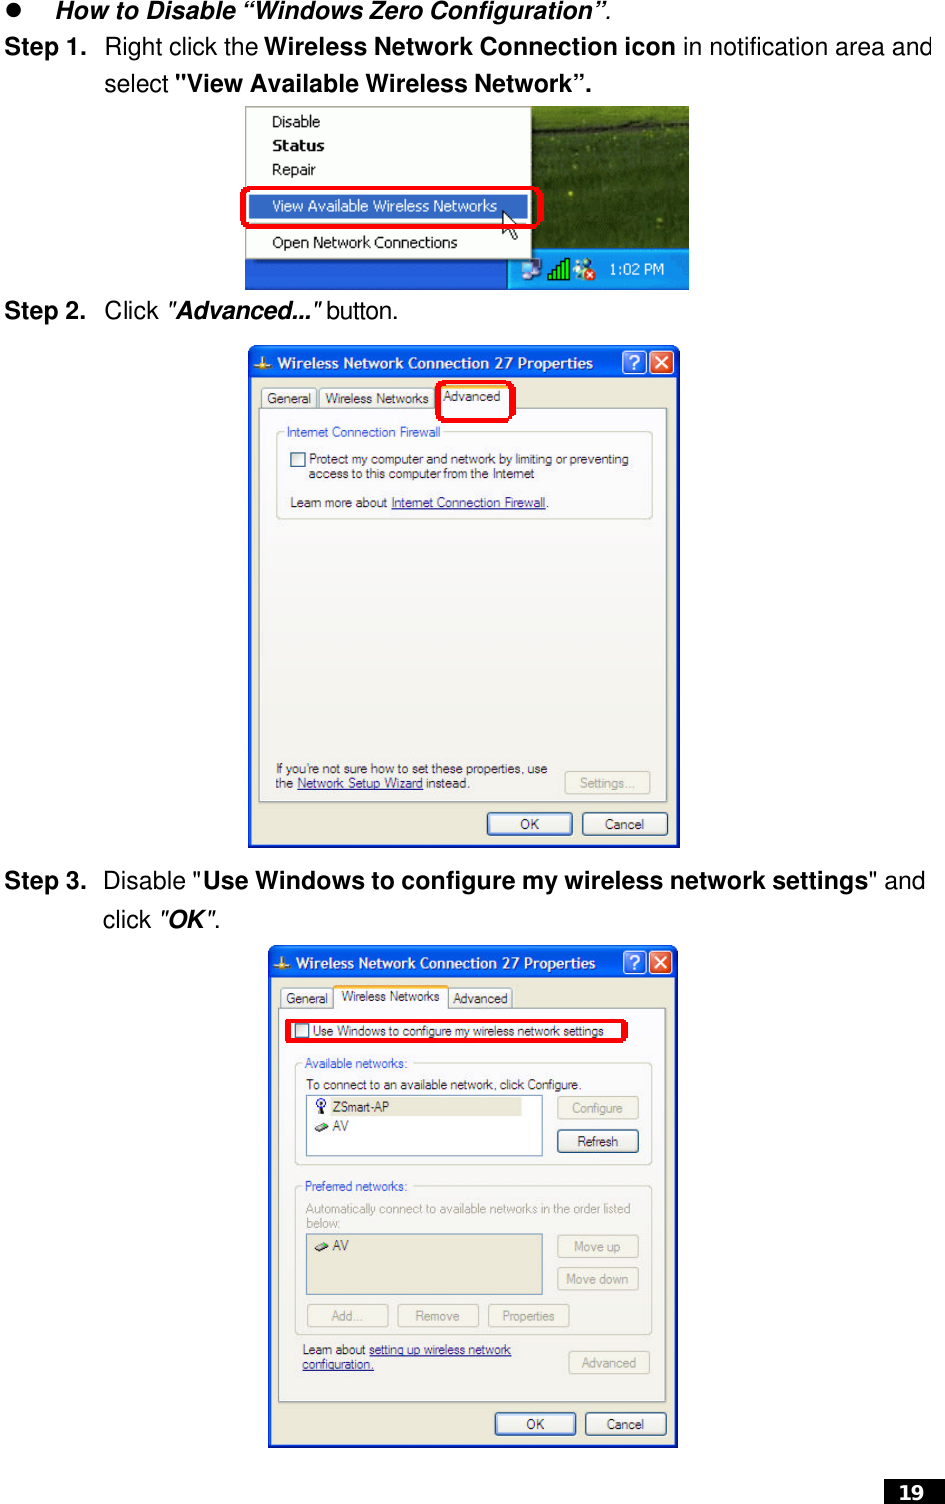  19  l How to Disable “Windows Zero Configuration”. Step 1. Right click the Wireless Network Connection icon in notification area and select &quot;View Available Wireless Network”.   Step 2. Click &quot;Advanced...&quot; button.         Step 3. Disable &quot;Use Windows to configure my wireless network settings&quot; and click &quot;OK&quot;.                         